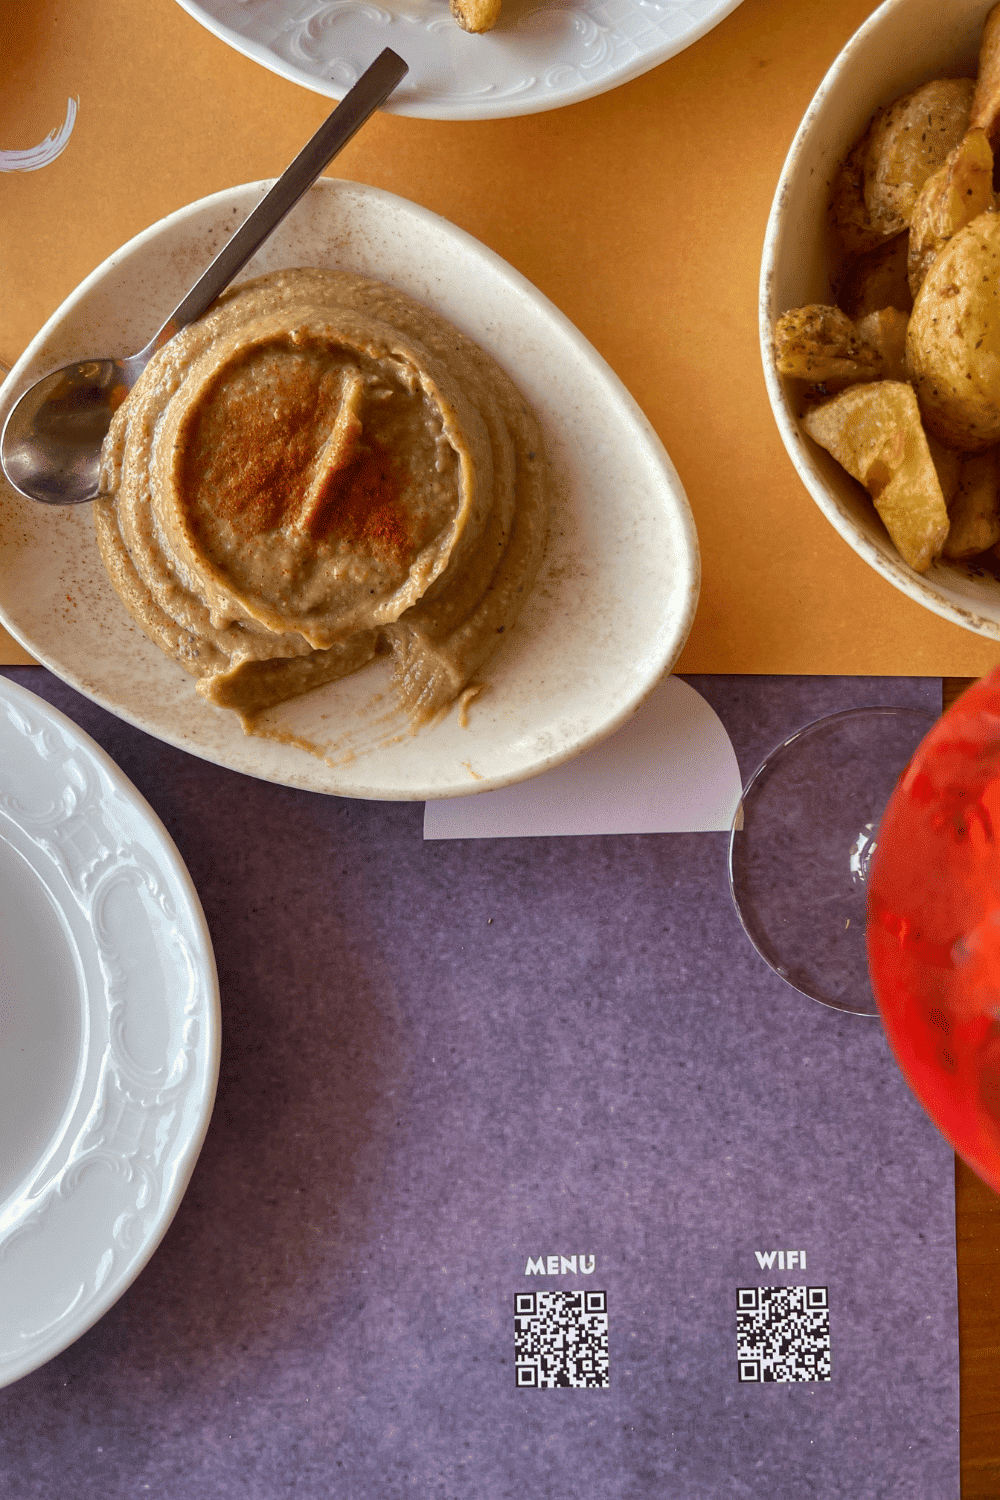 An overhead shot of a table at a restaurant featuring a plate of hummus with a dash of paprika on top, next to a bowl of roasted potatoes. A white plate, a glass with a red drink, and part of the restaurant's purple place mat with QR codes for a menu and WiFi are also visible